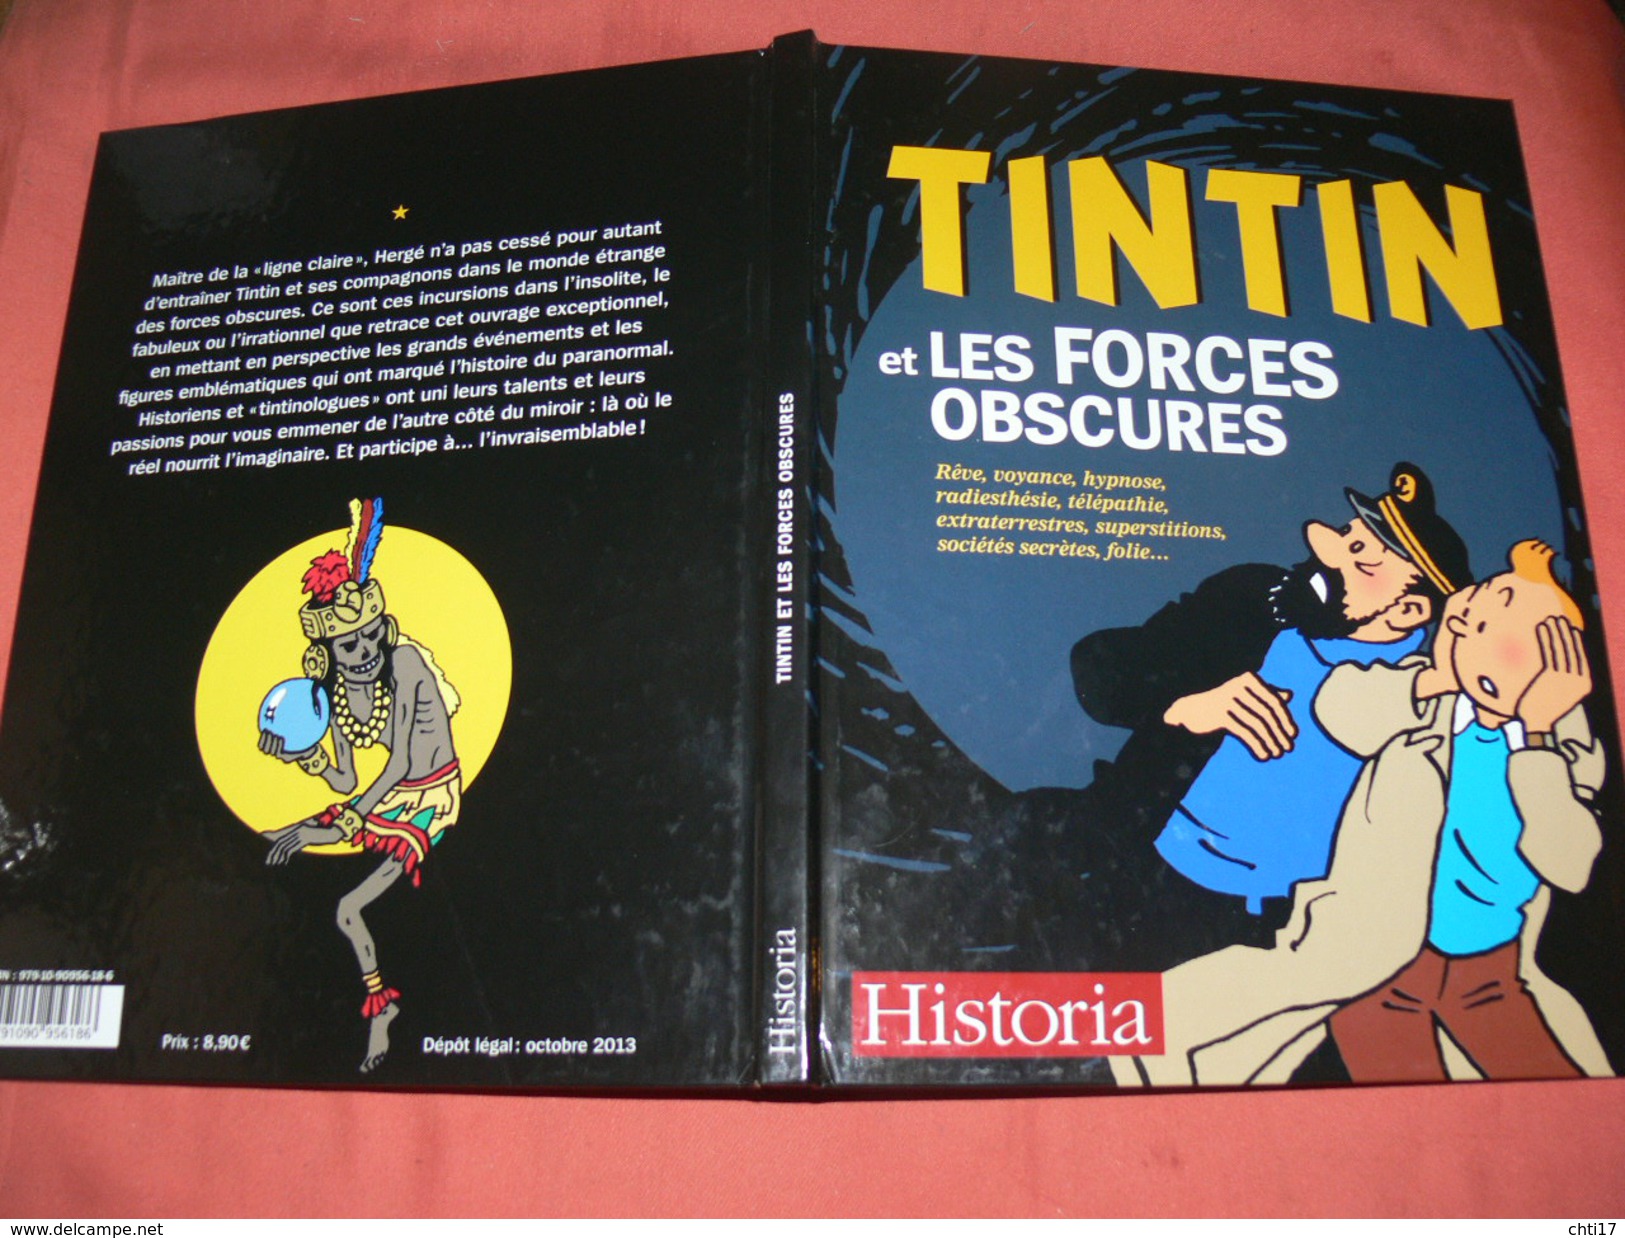 TINTIN / HERGE/ LES FORCES OBSCURES QUI ONT INSPIRES HERGE / REVE VOYANCE HYPNOSE RADIESTHESIE FOLIE SUPERSTITION /2013 - Hergé